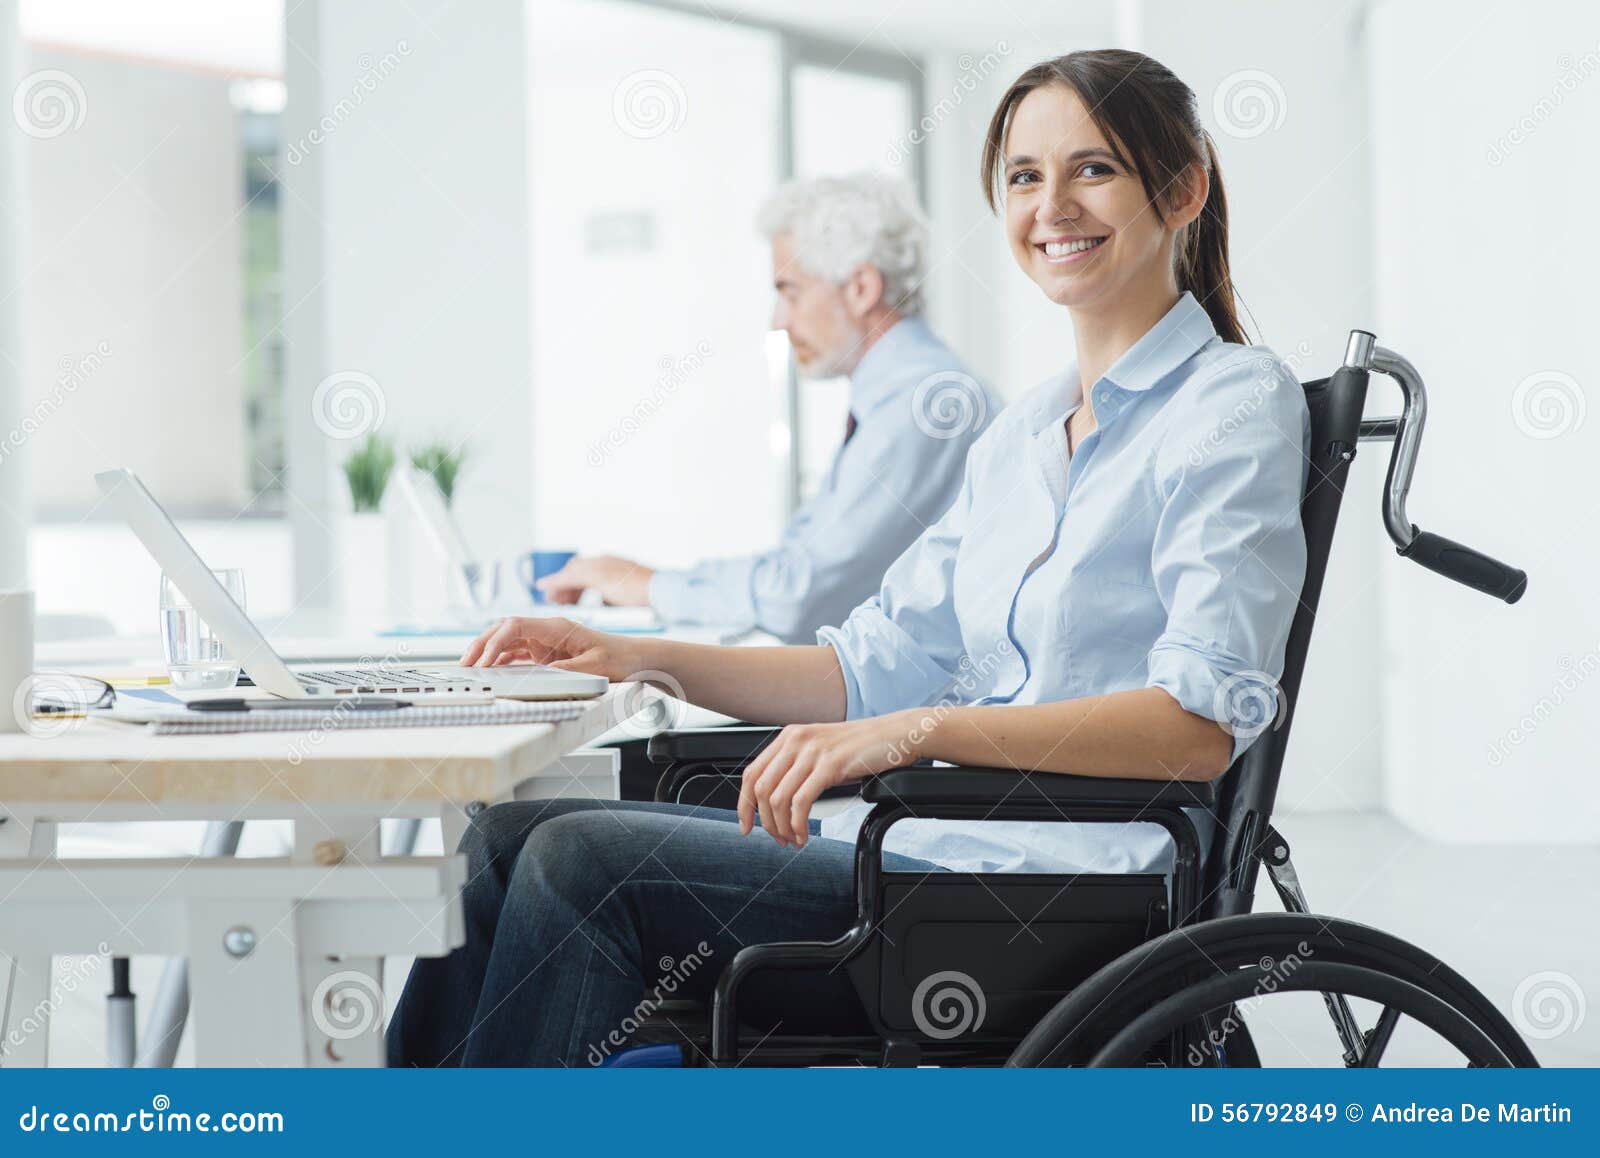 smiling business woman in wheelchair